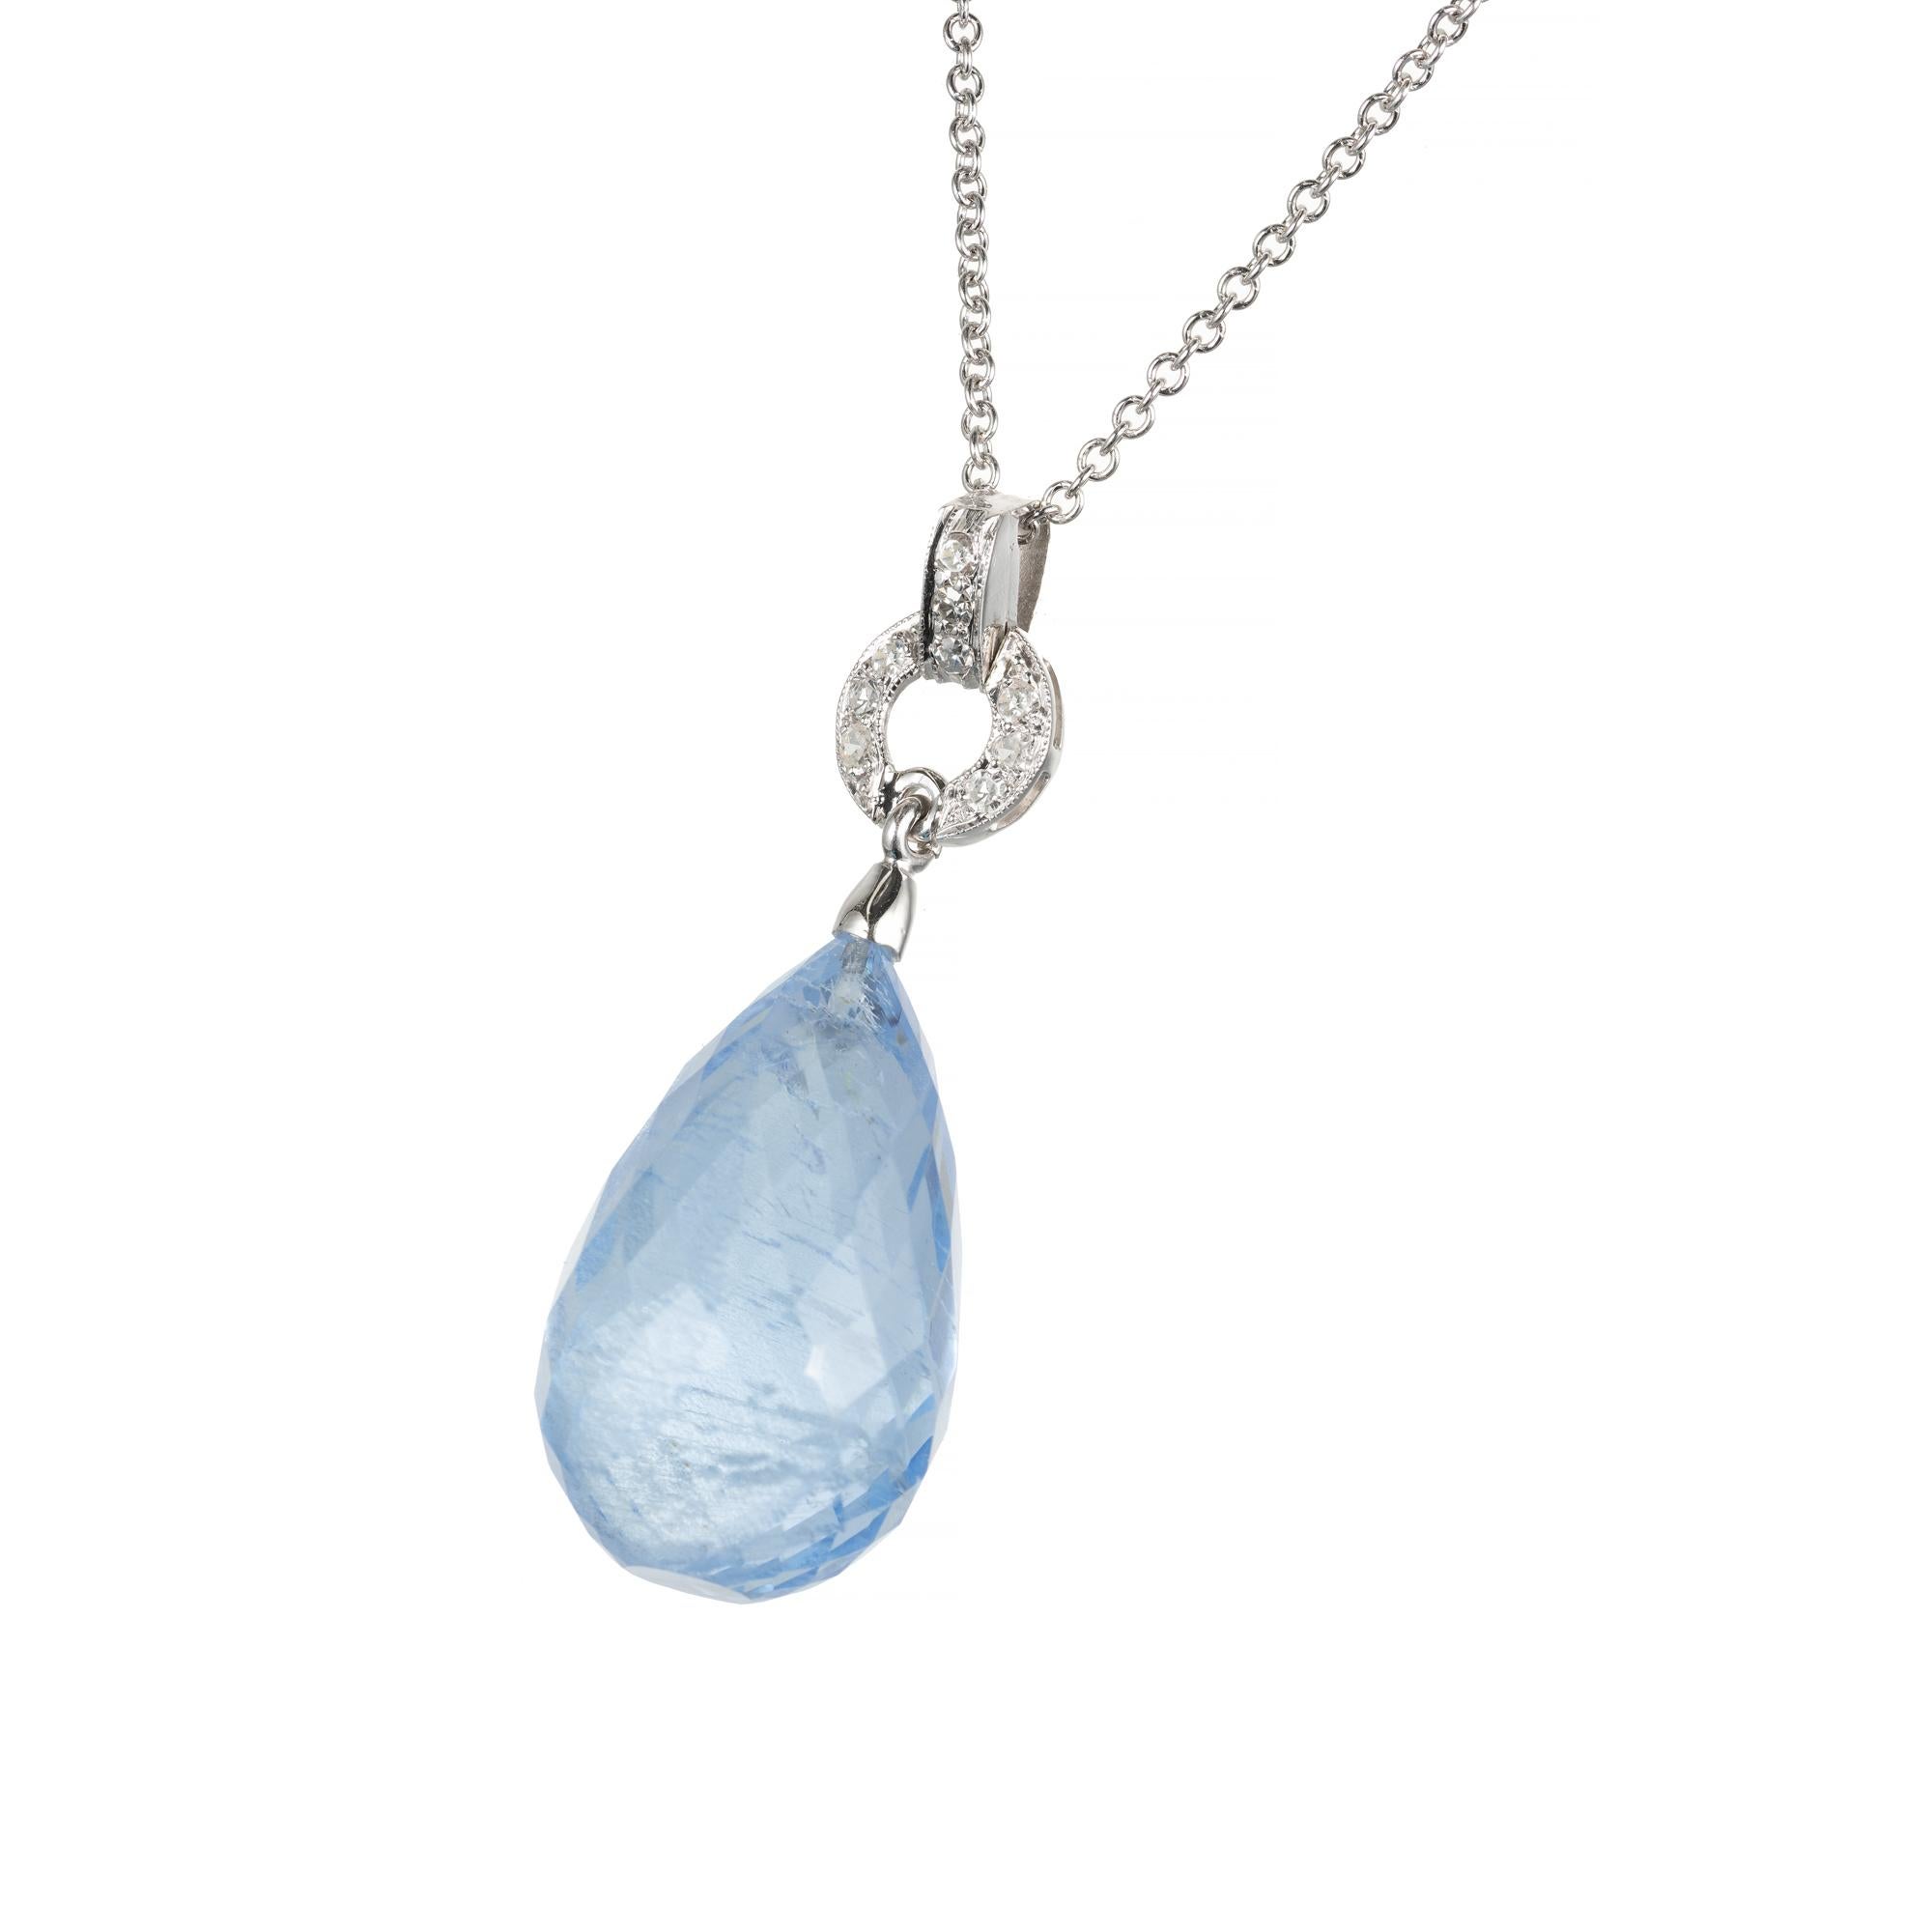  20.00ct natural Aqua and diamond pendant necklace. Art Deco Style briolette aquamarine stone with diamond accents set in platinum.

1 Natural untreated no heat Aqua briolette 20 x 12.3mm, approx. total weight 20.00cts translucent, moderate natural